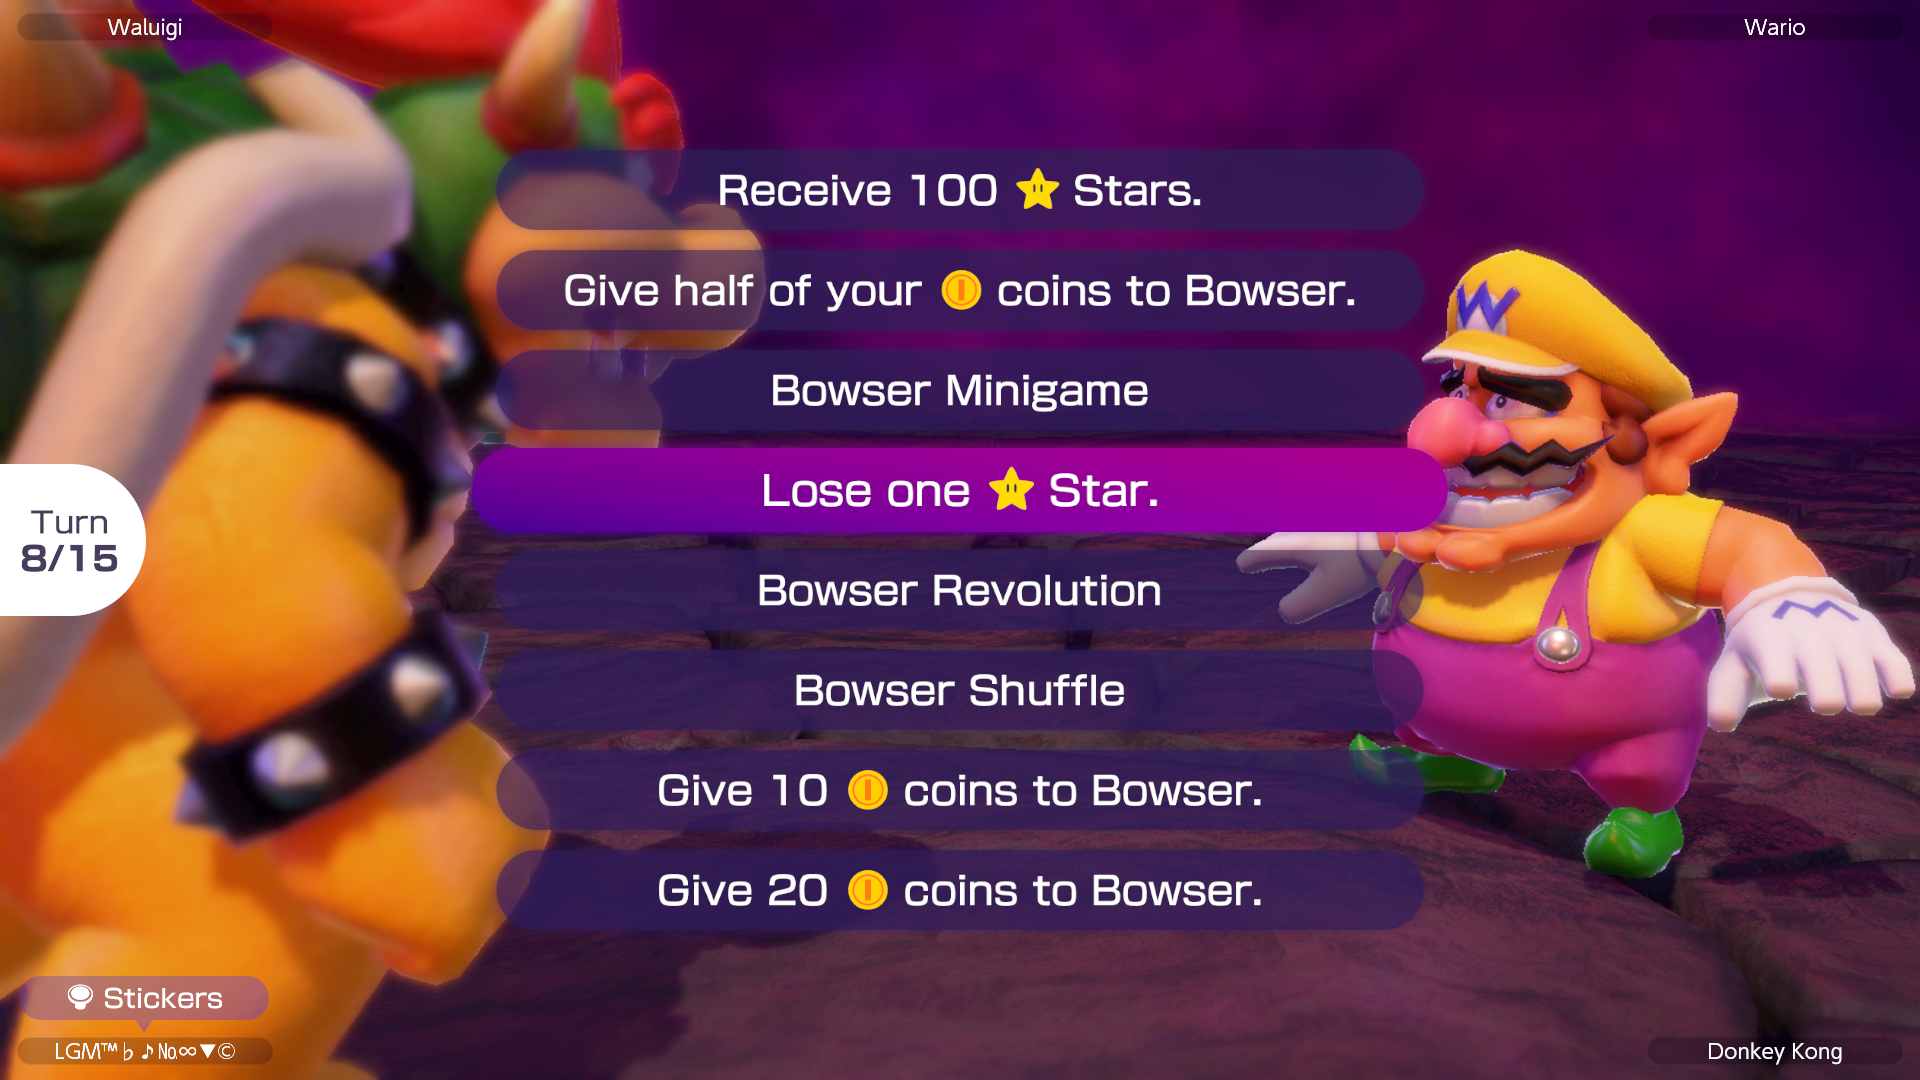 Wario_on_the_Bowser_Space_-_MSS.png